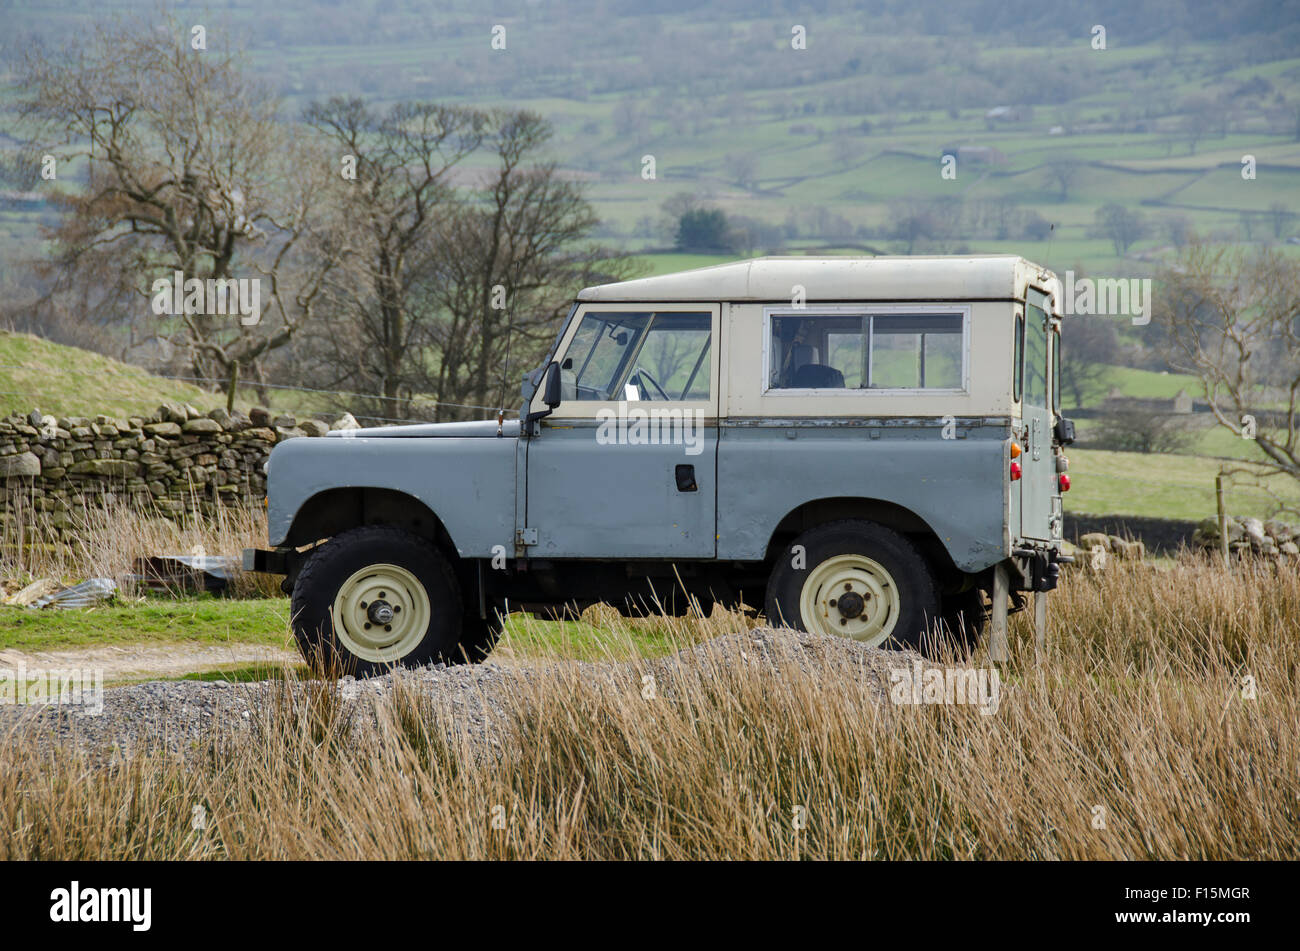 Iconic, classic, rugged, grey, Series IIA Land Rover 4x4 off-road vehicle, parked in a field -  Wharfedale, Yorkshire Dales countryside, England, UK. Stock Photo